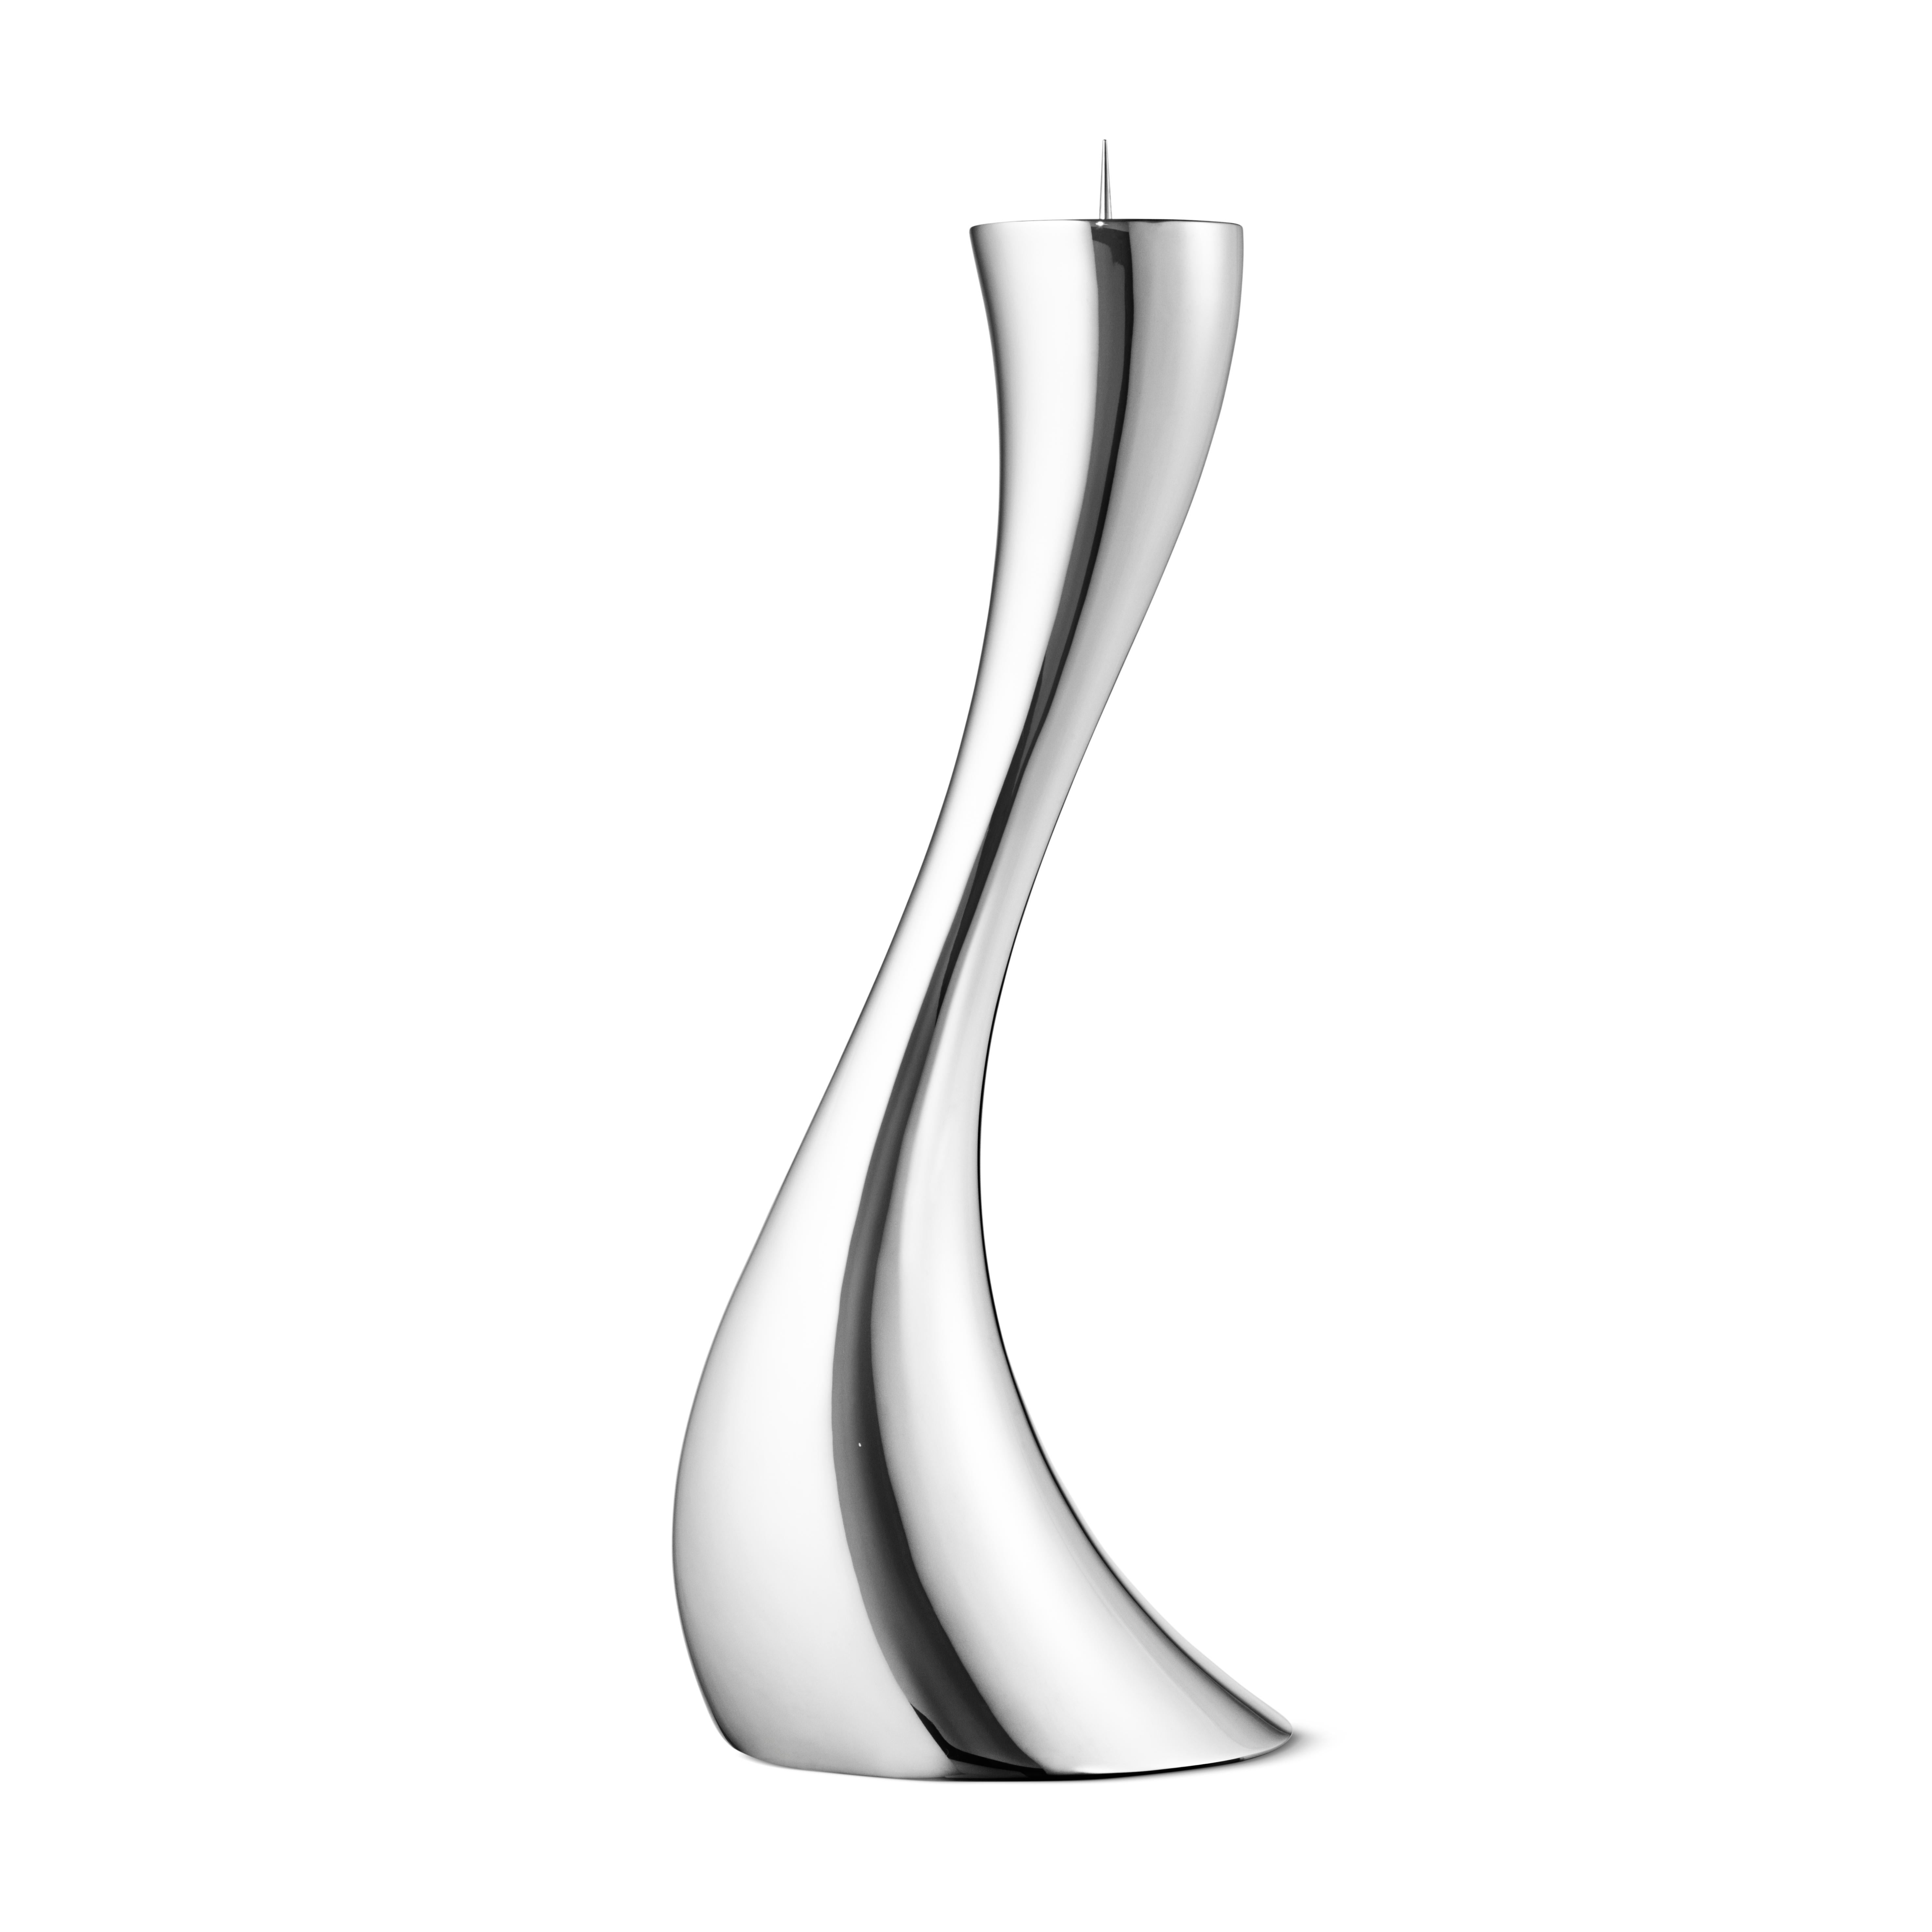 Cobra’s gorgeous spirals take on new dimensions as spectacular floor candleholders. What started as a vision for the tabletop has become a growing family thanks to three candleholders for the floor. Curving upward from its base, Cobra is instantly